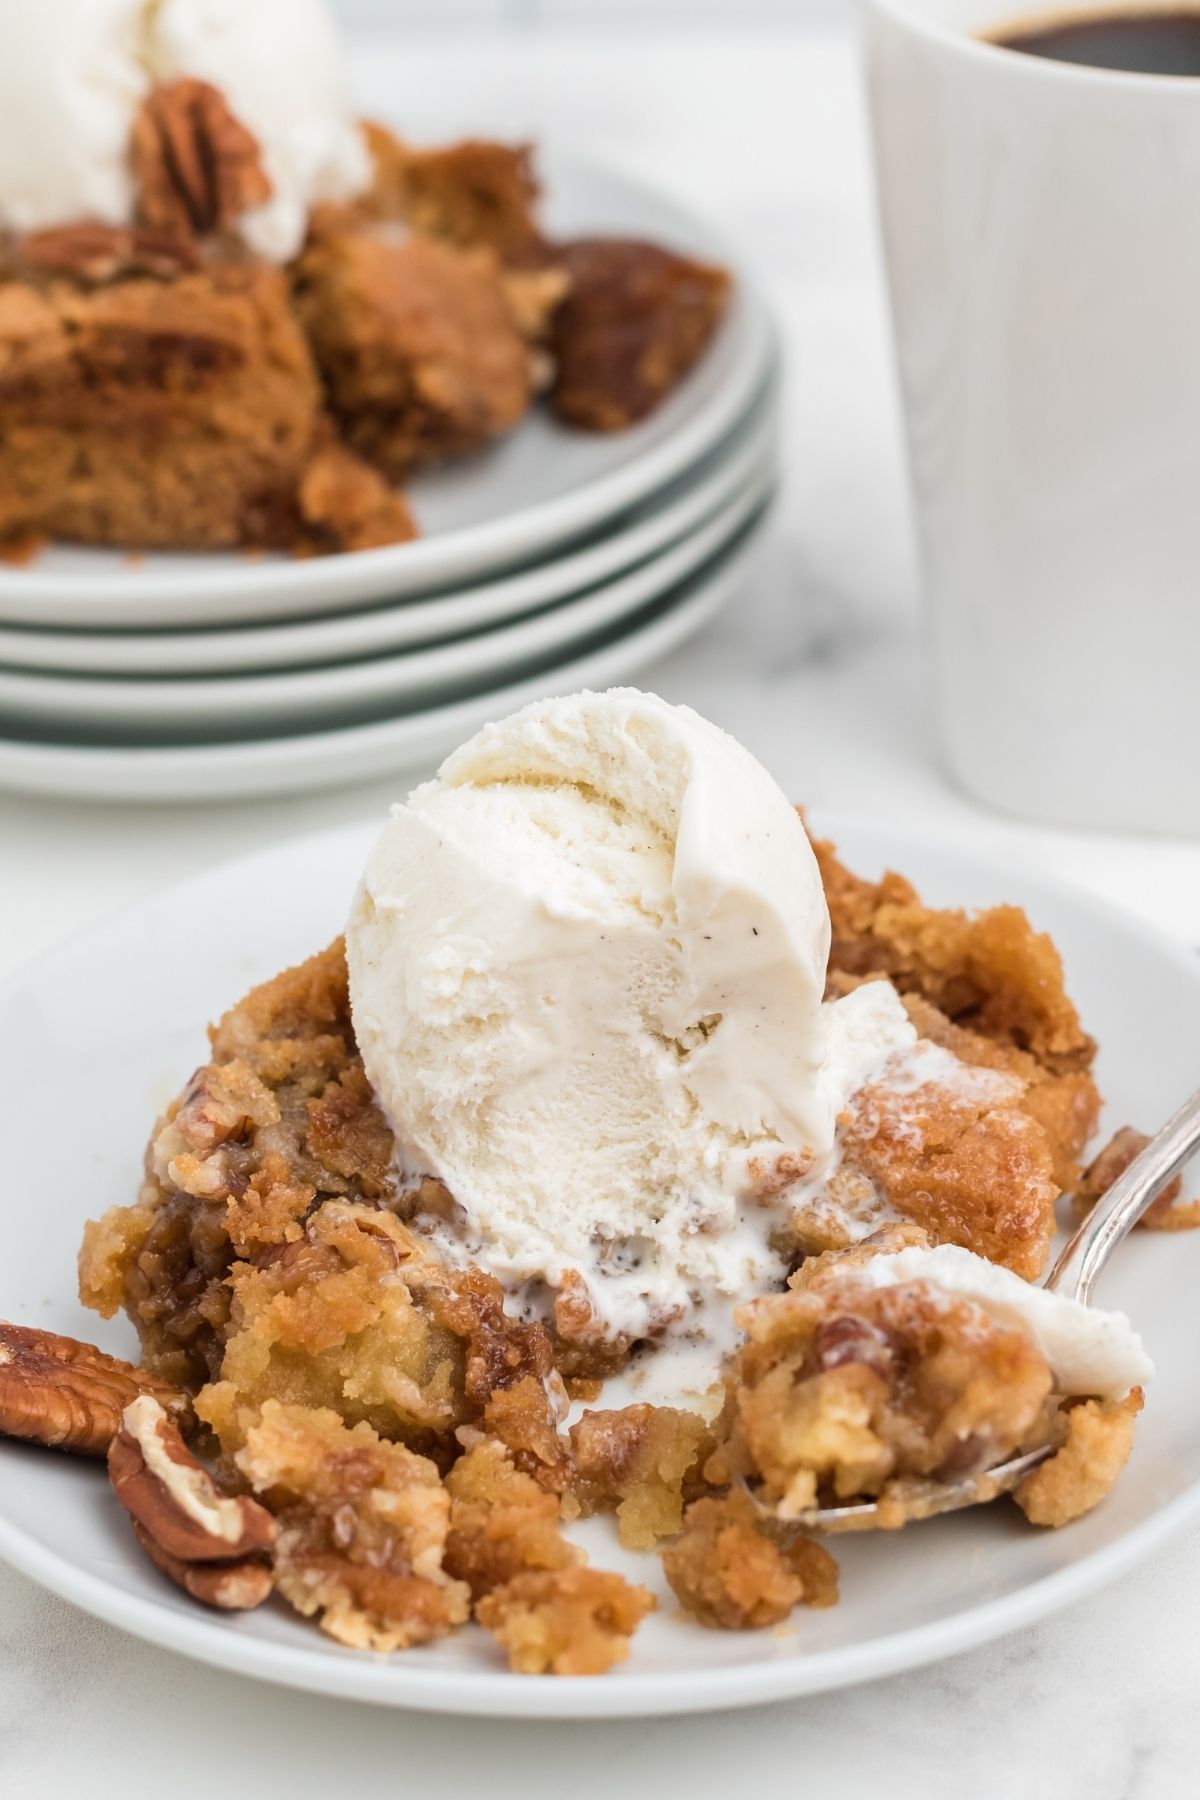 pecan dump cake with ice cream on top with plates and a cup of coffee